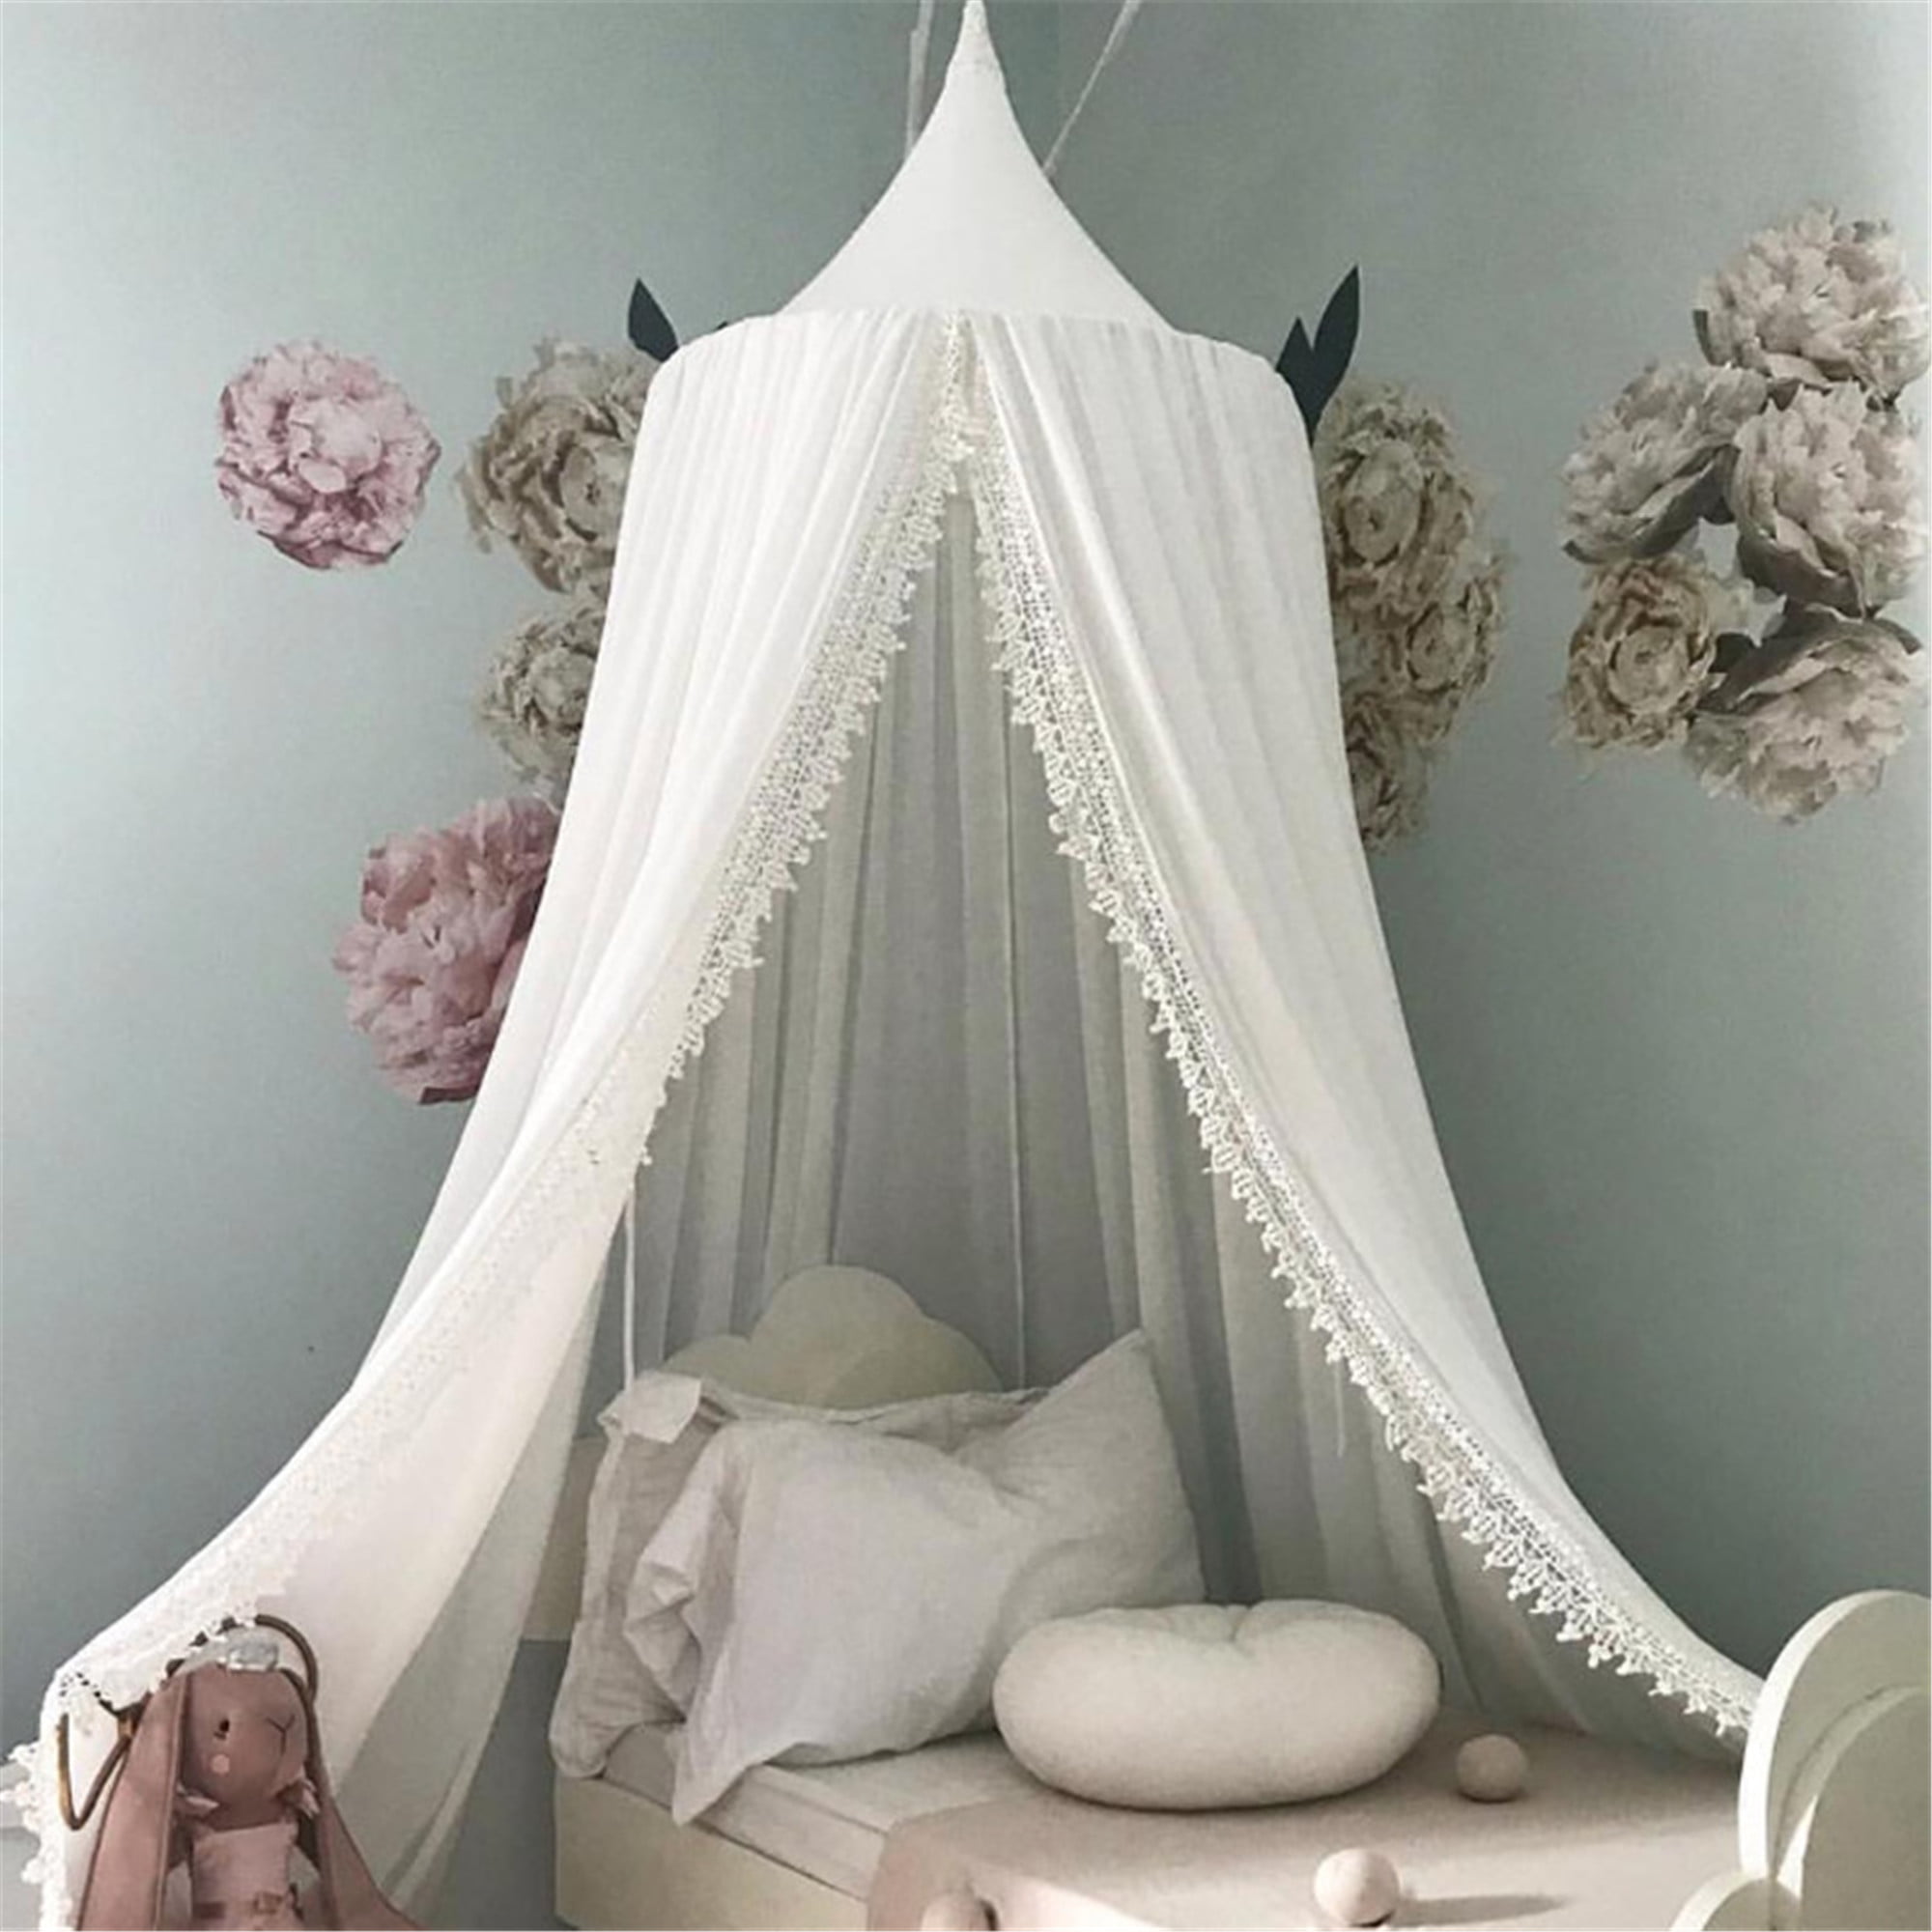 Herbests Bed Canopy Mosquito Net Anti-Insect Breathable & Comfortable Baby Princess Bed Canopy Mosquito Protection for Toddlers' Bedroom Girls Boys 